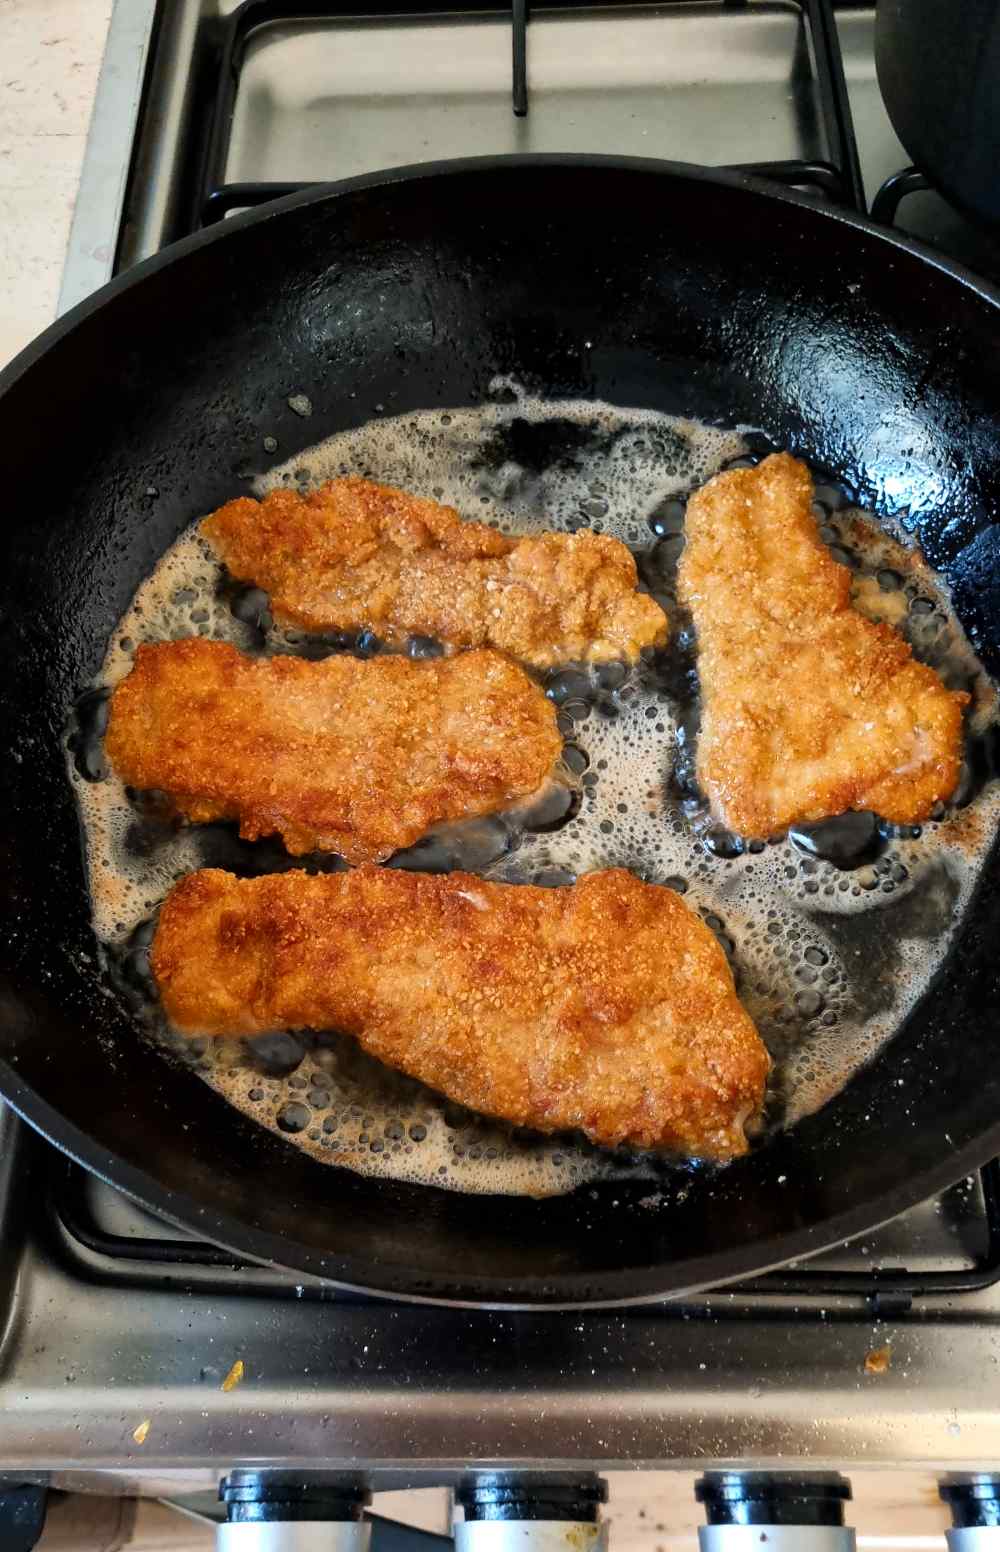 Frying the breaded pork cutlets on the other side.